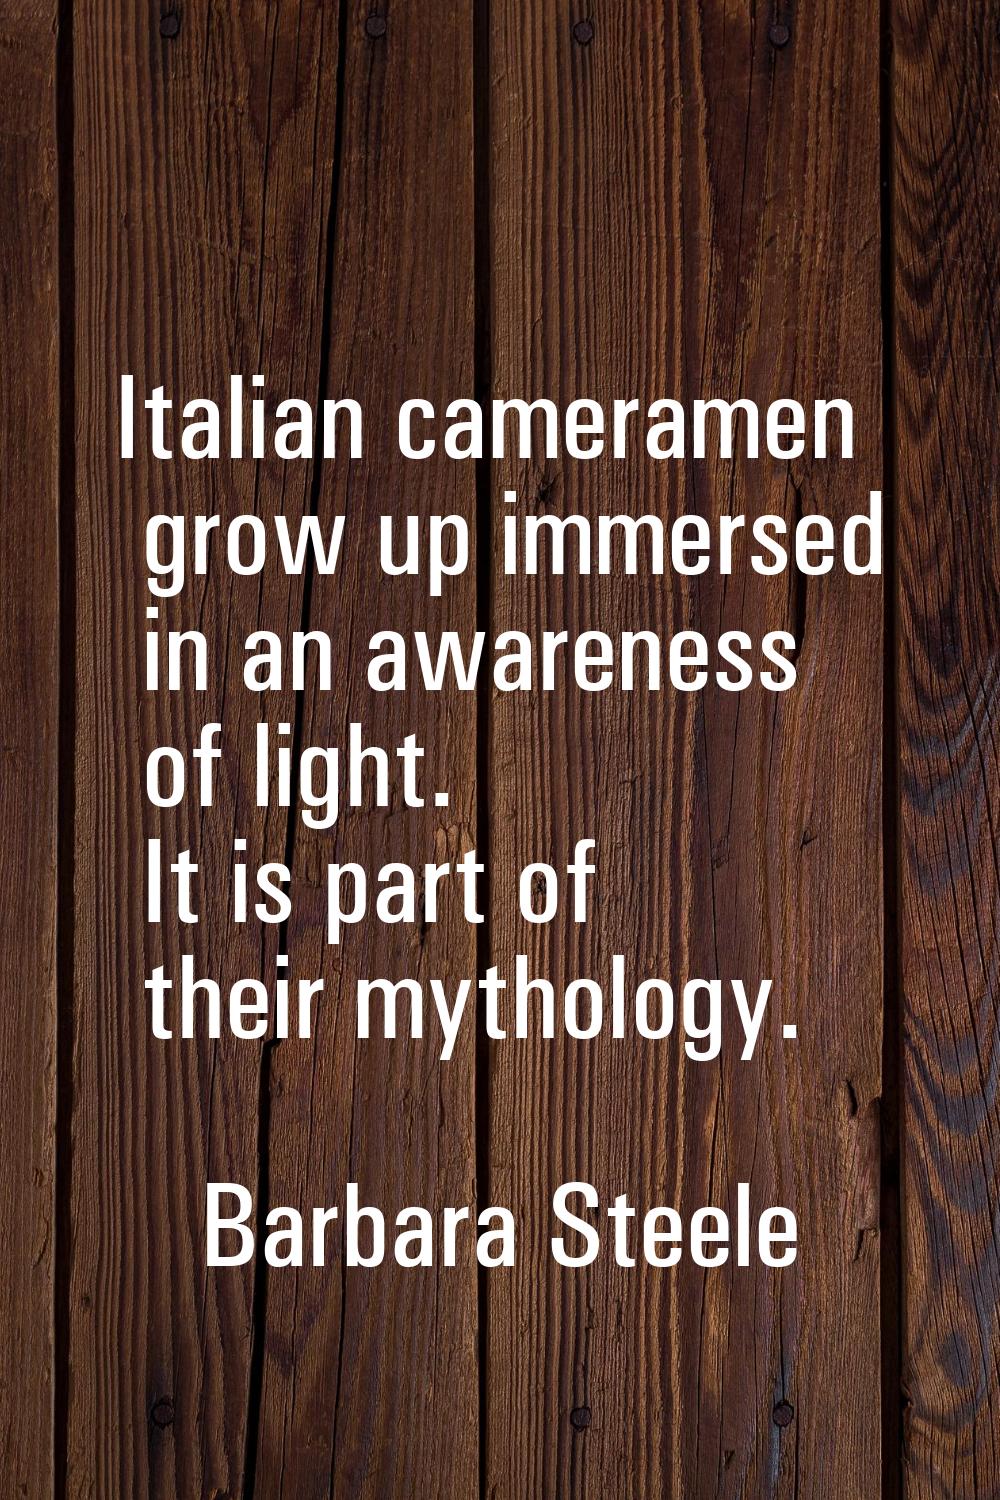 Italian cameramen grow up immersed in an awareness of light. It is part of their mythology.